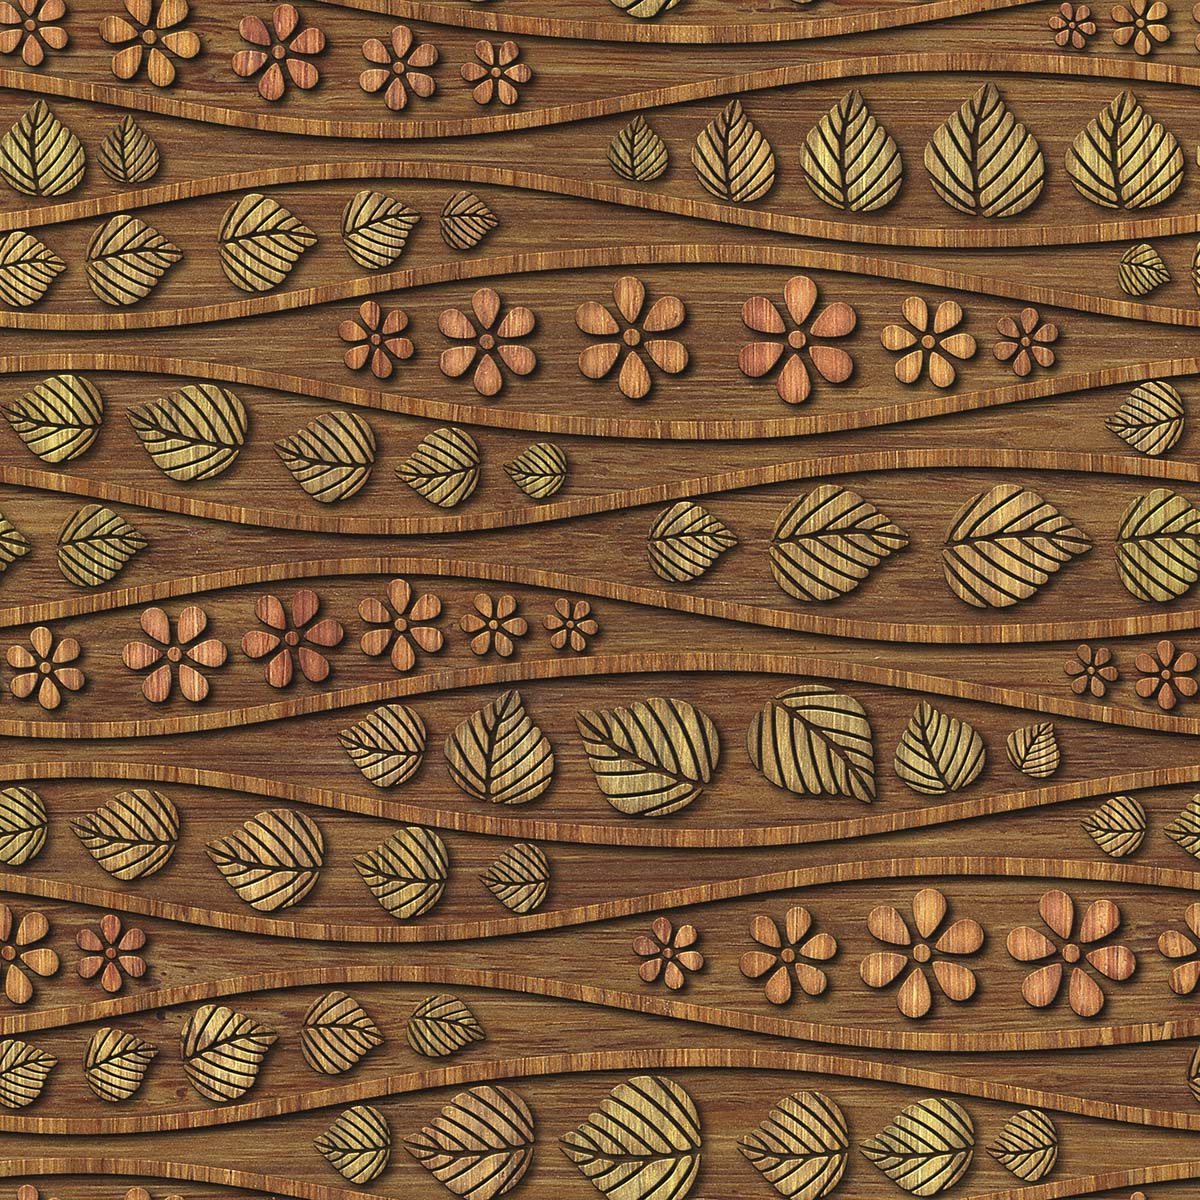 A pattern of leaves and flowers on a wood surface